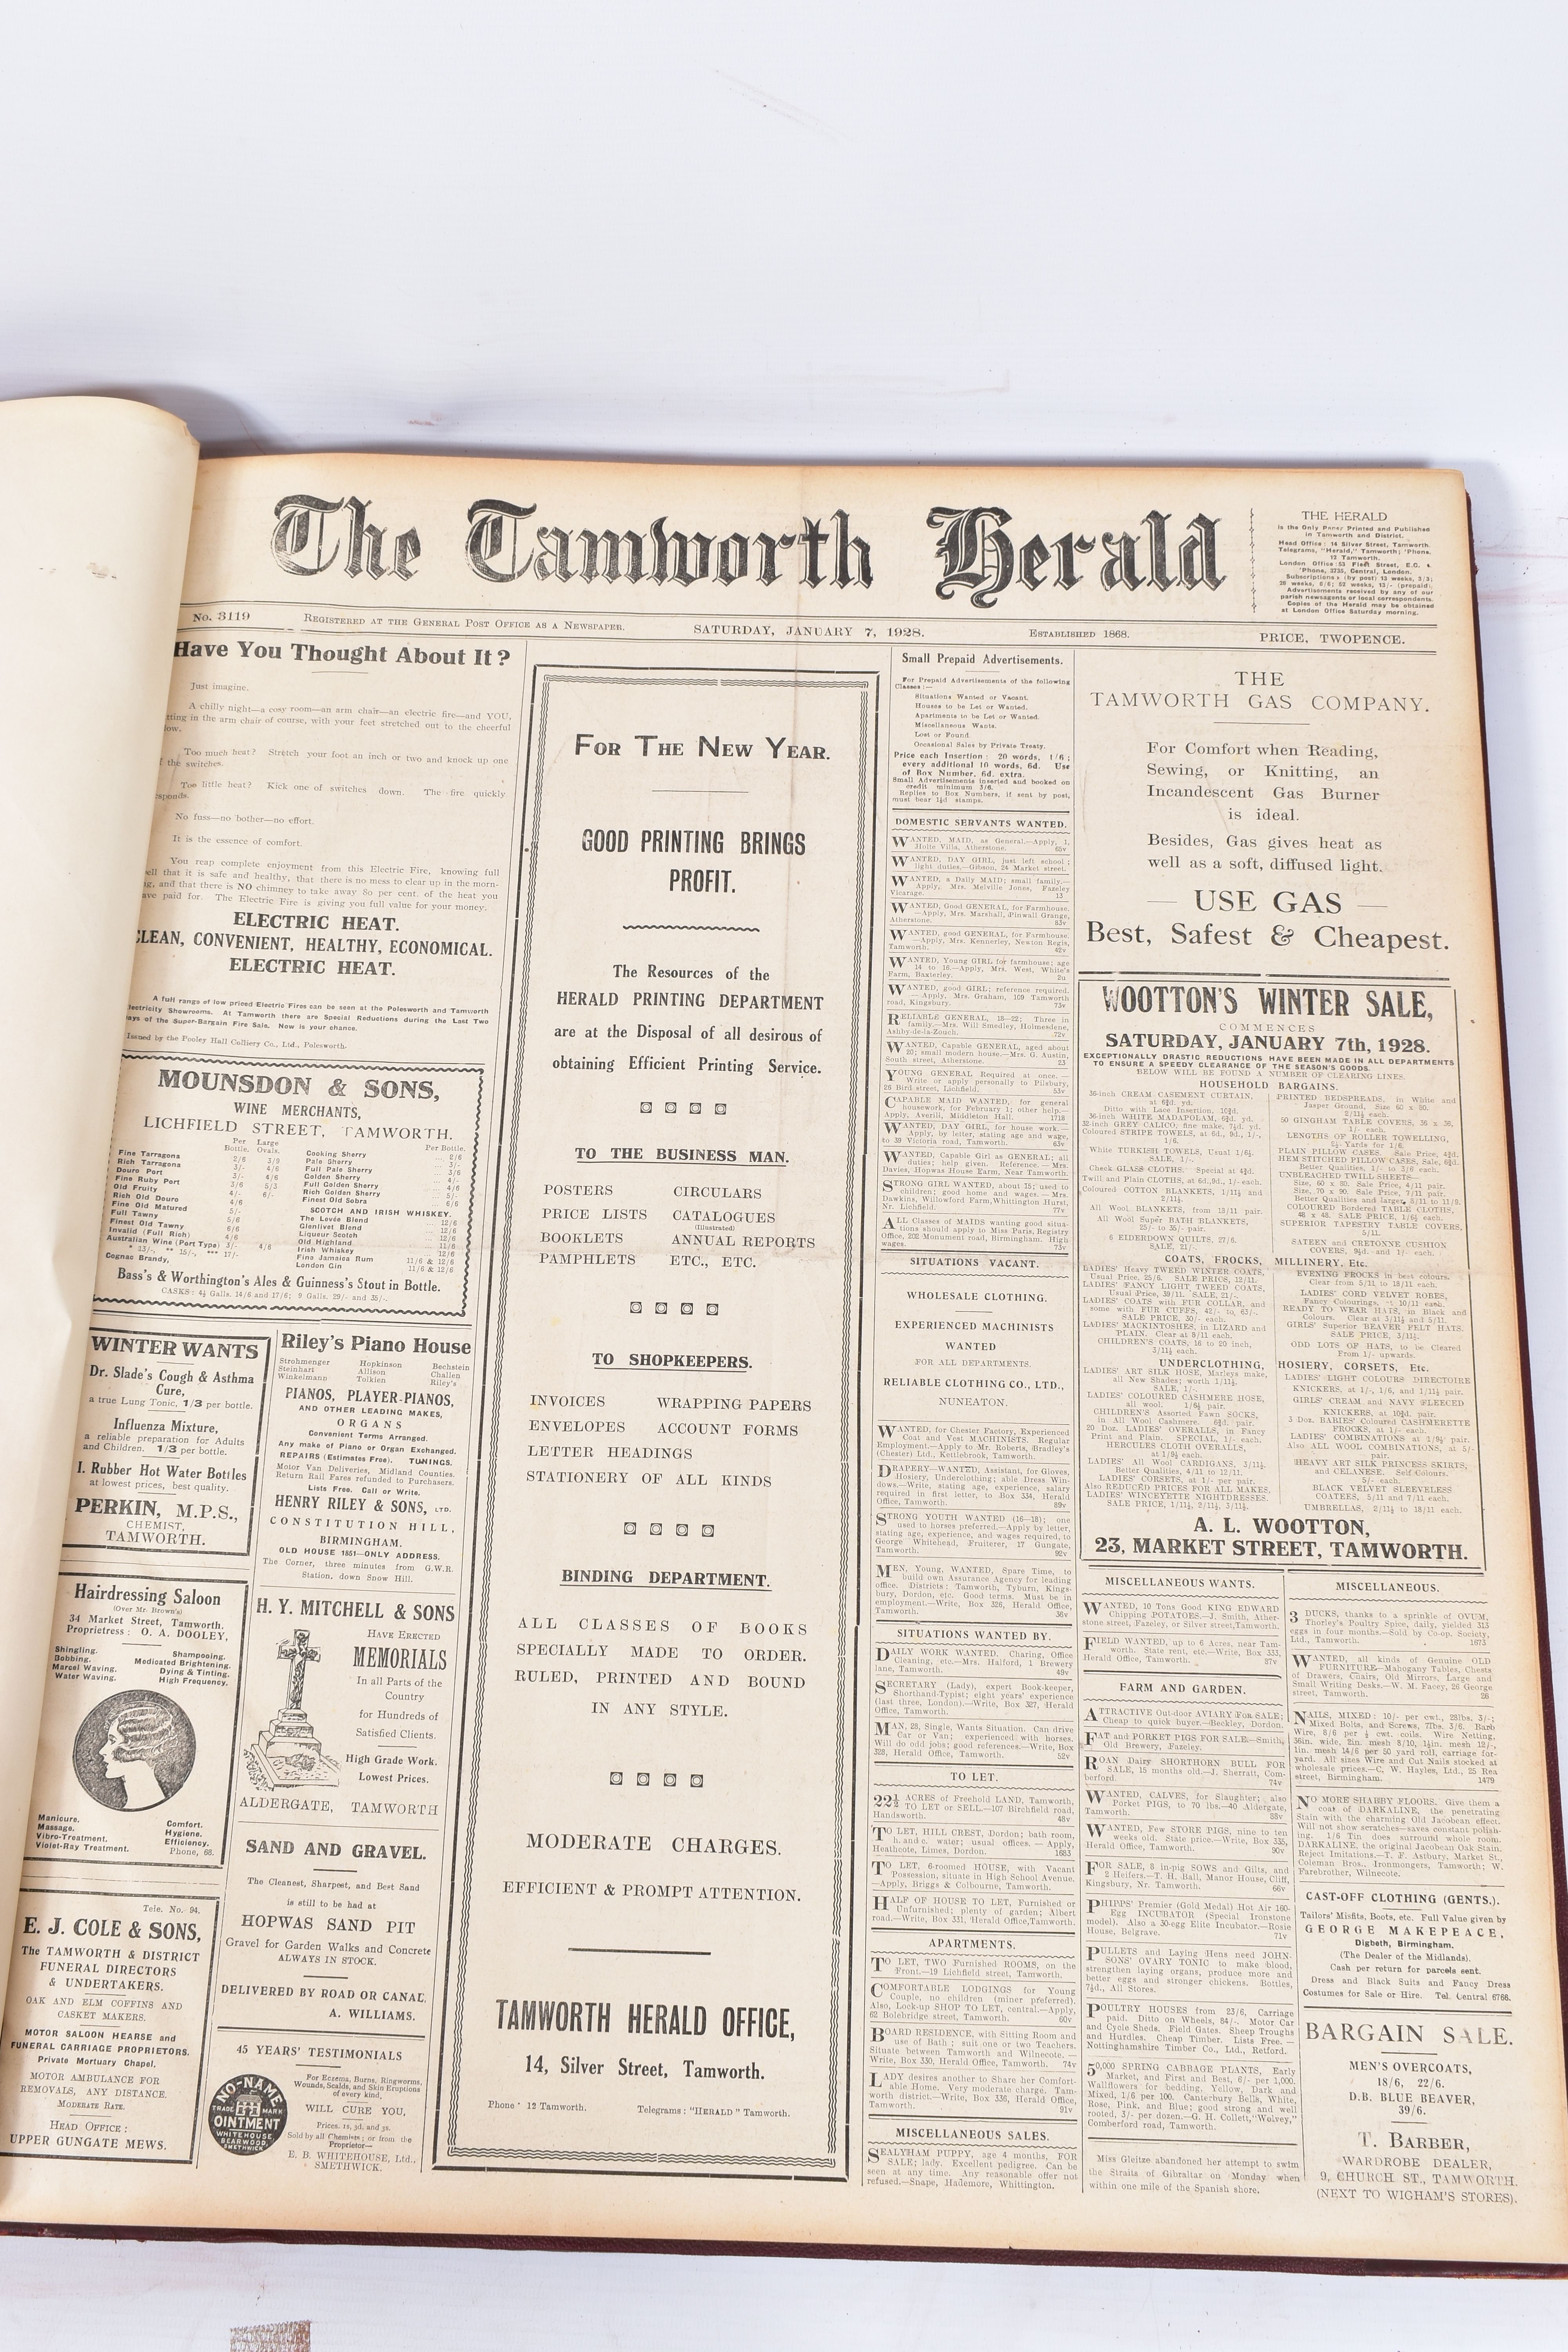 THE TAMWORTH HERALD, an Archive of the Tamworth Herald Newspaper from 1928, the newspapers are bound